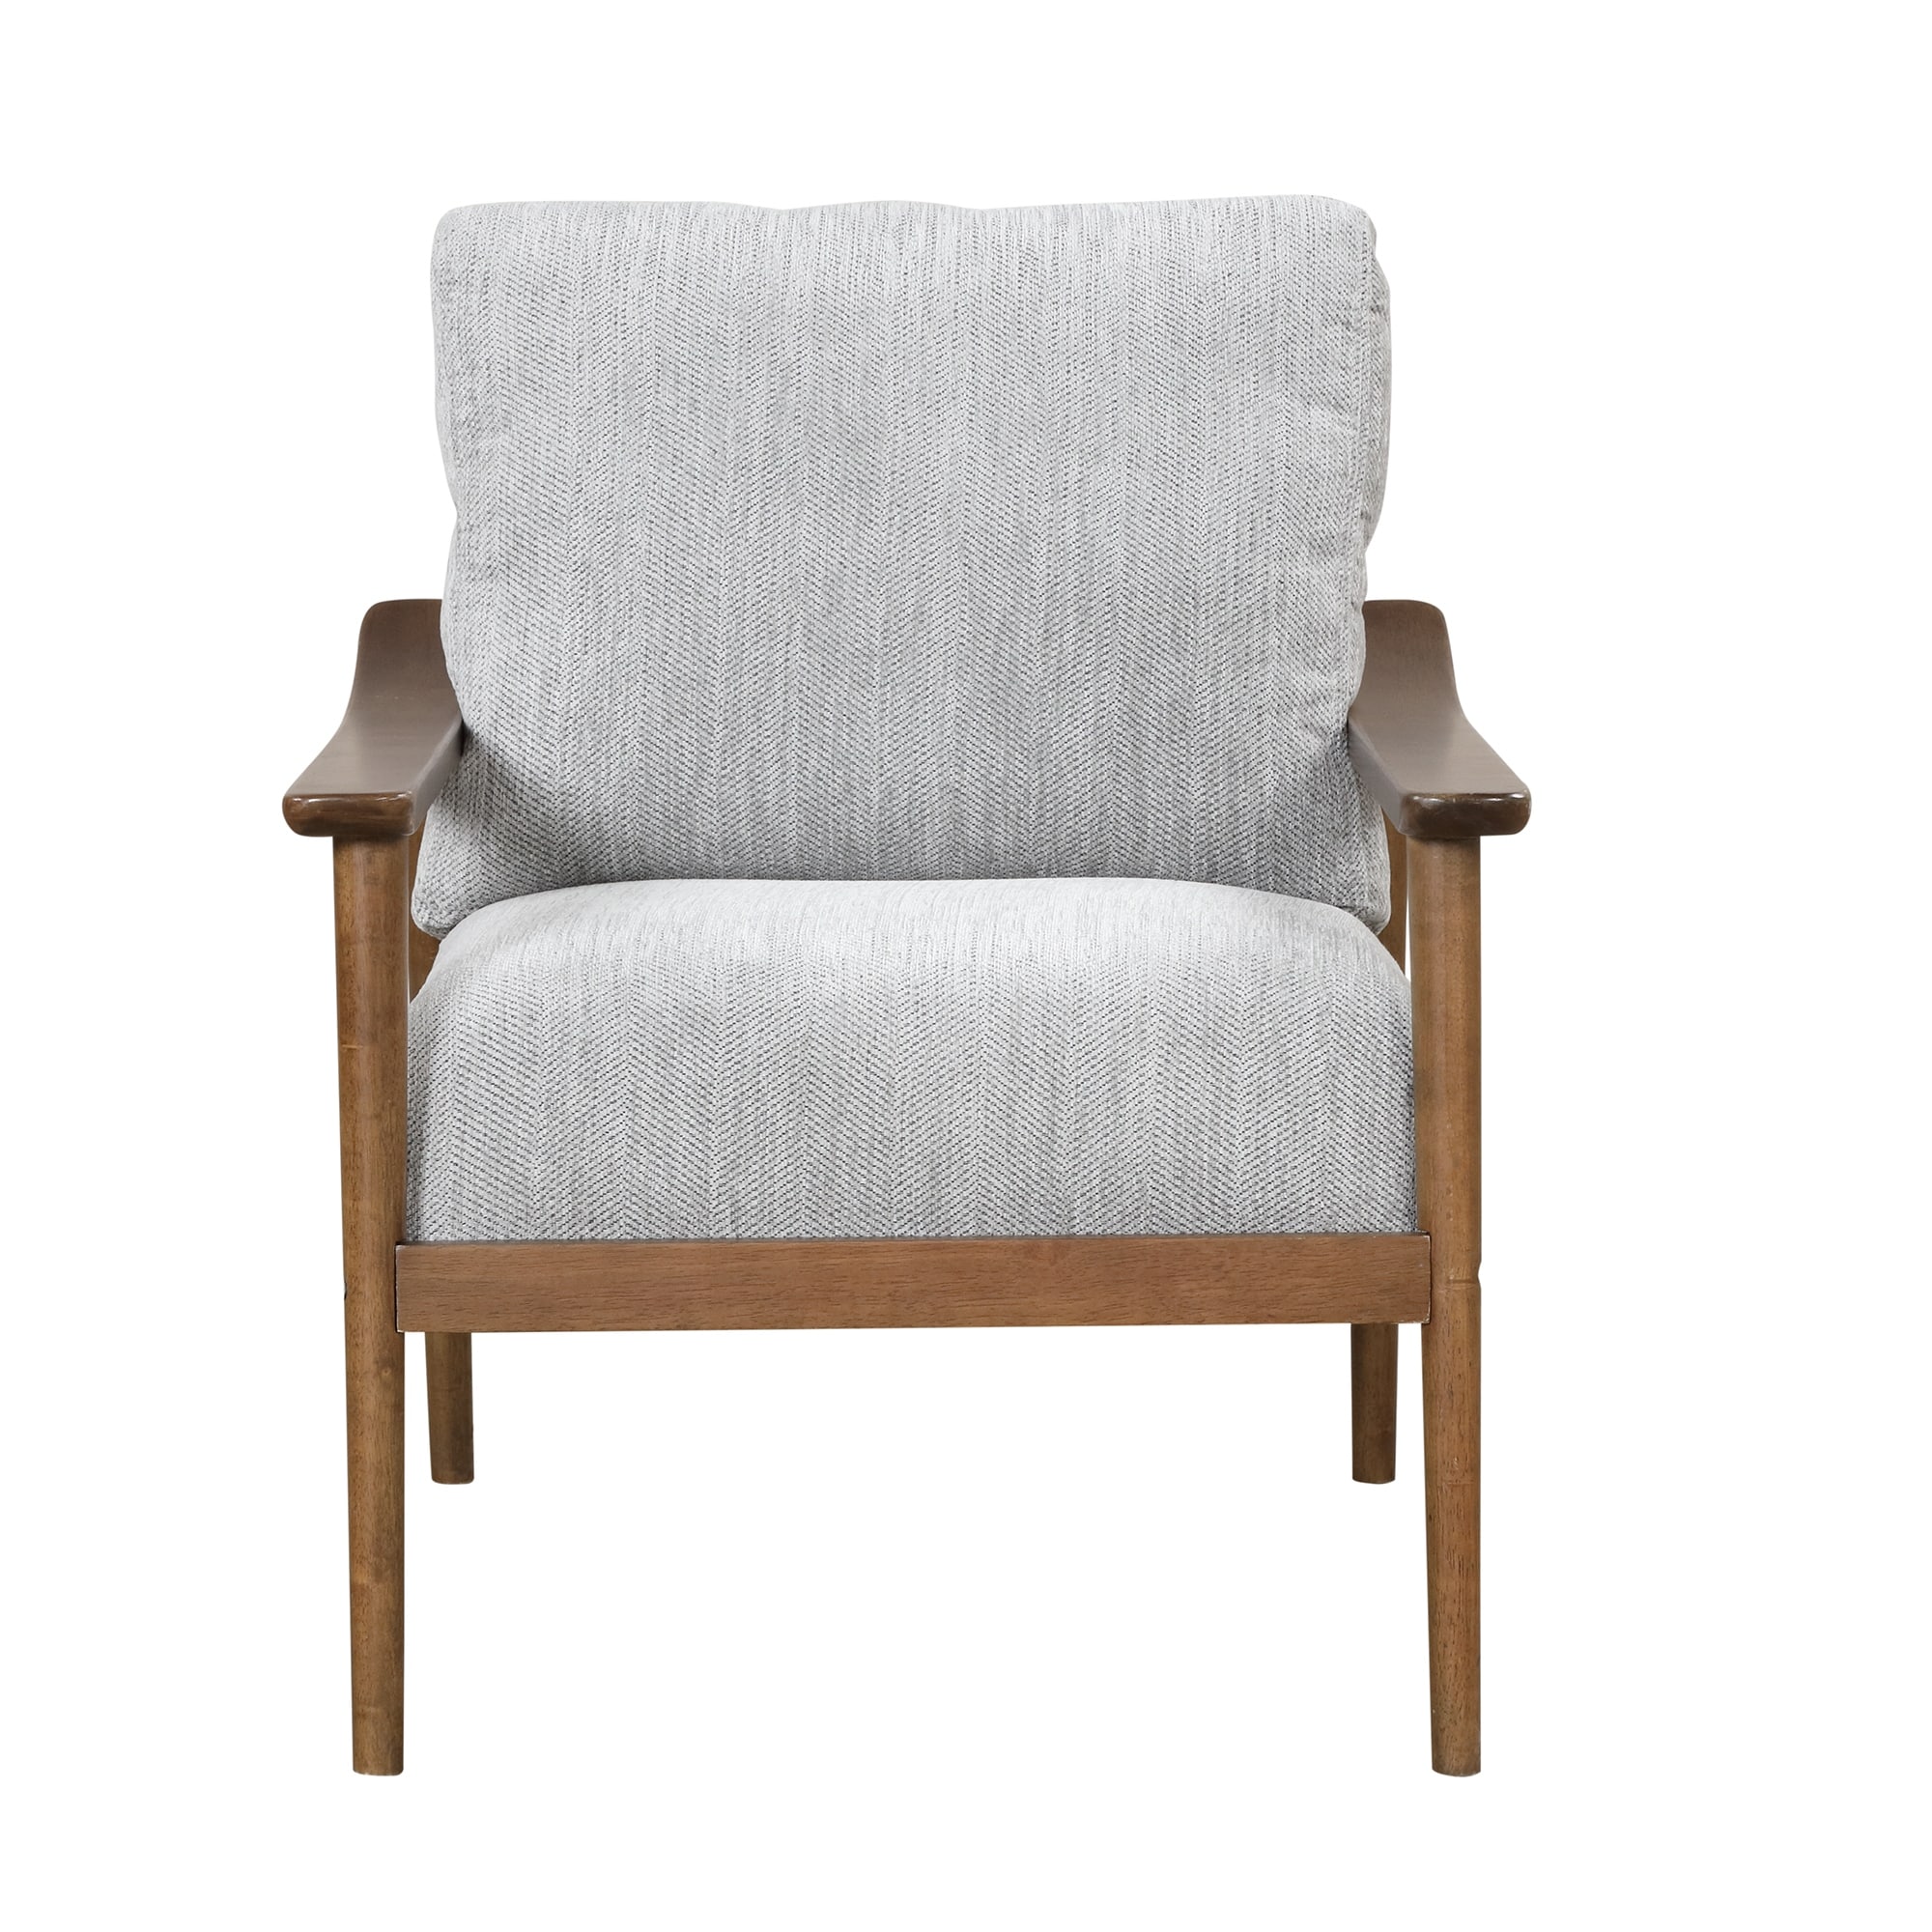 Modern Accent Chairs Upholstered Arm Chairs with Solid Wood Frame